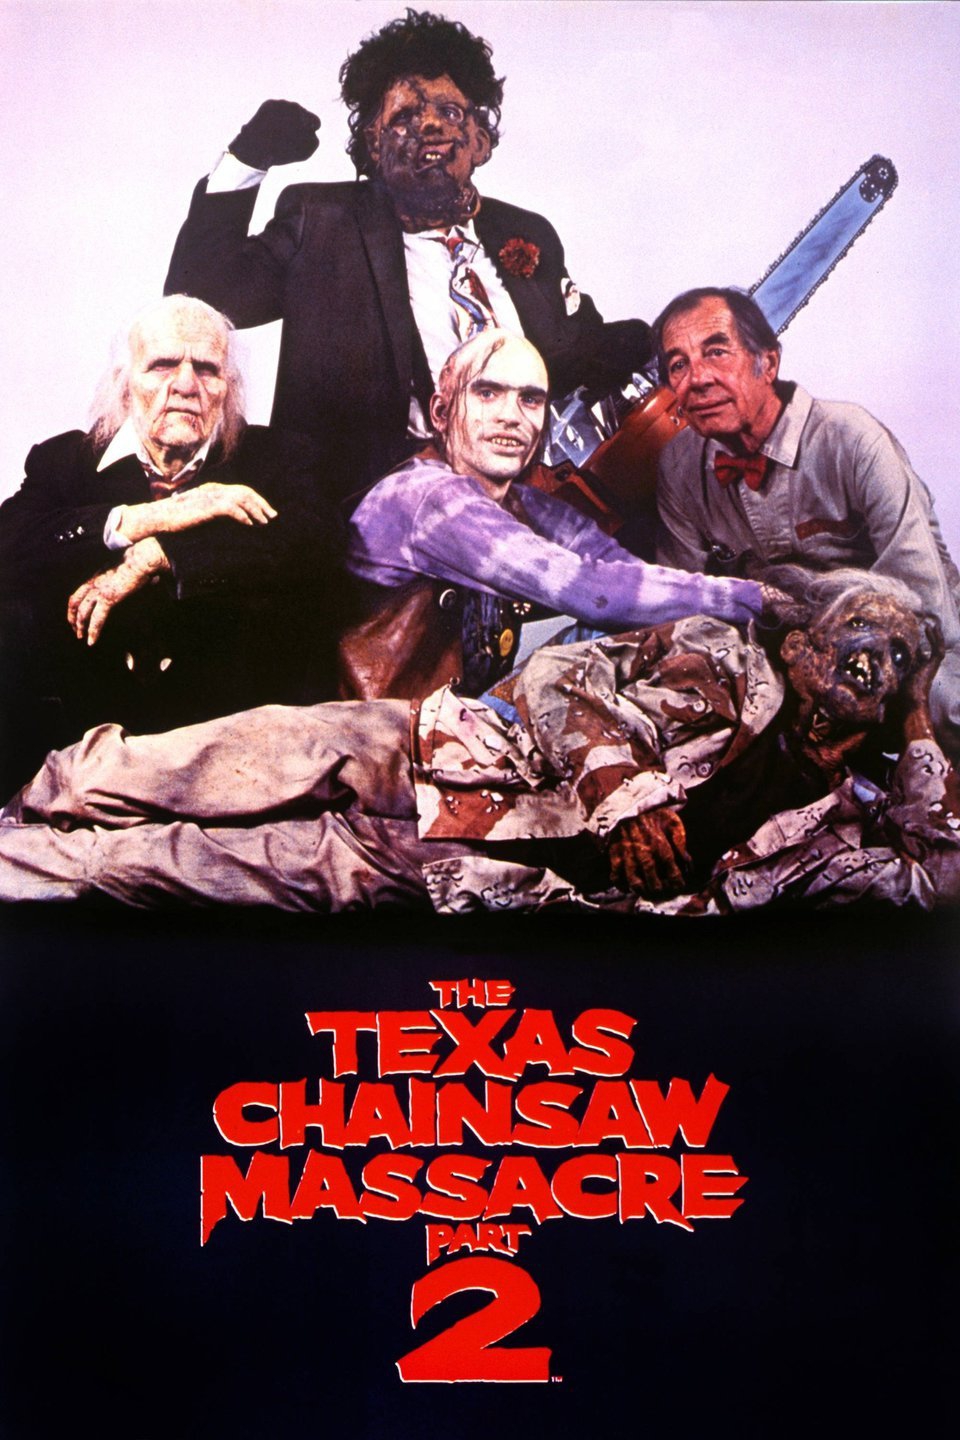 Watch The Texas Chainsaw Massacre Part 2 (1986) Online for Free | The